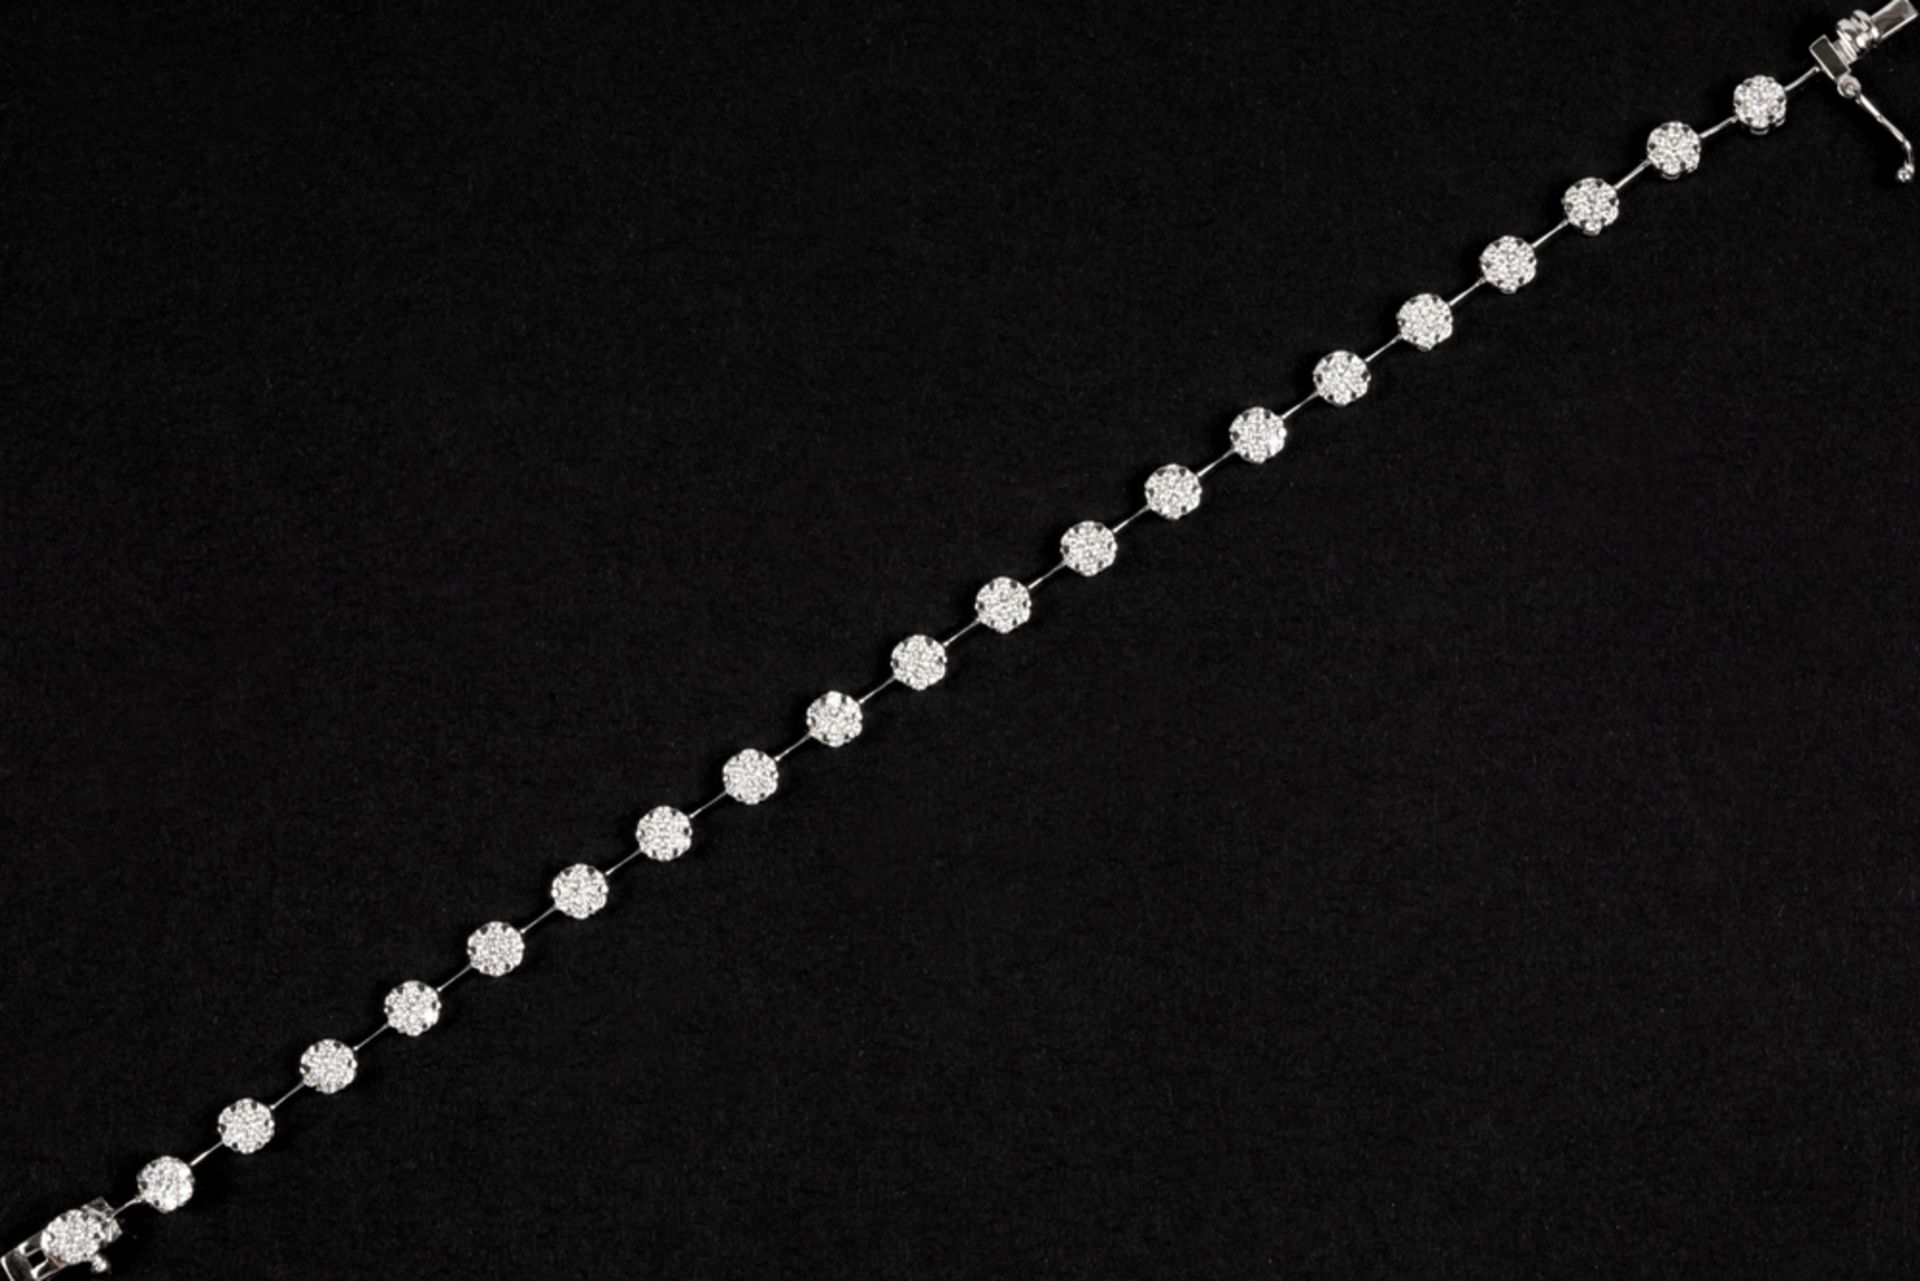 elegant bracelet in white gold (18 carat) with more than 2 carat of very high quality brilliant